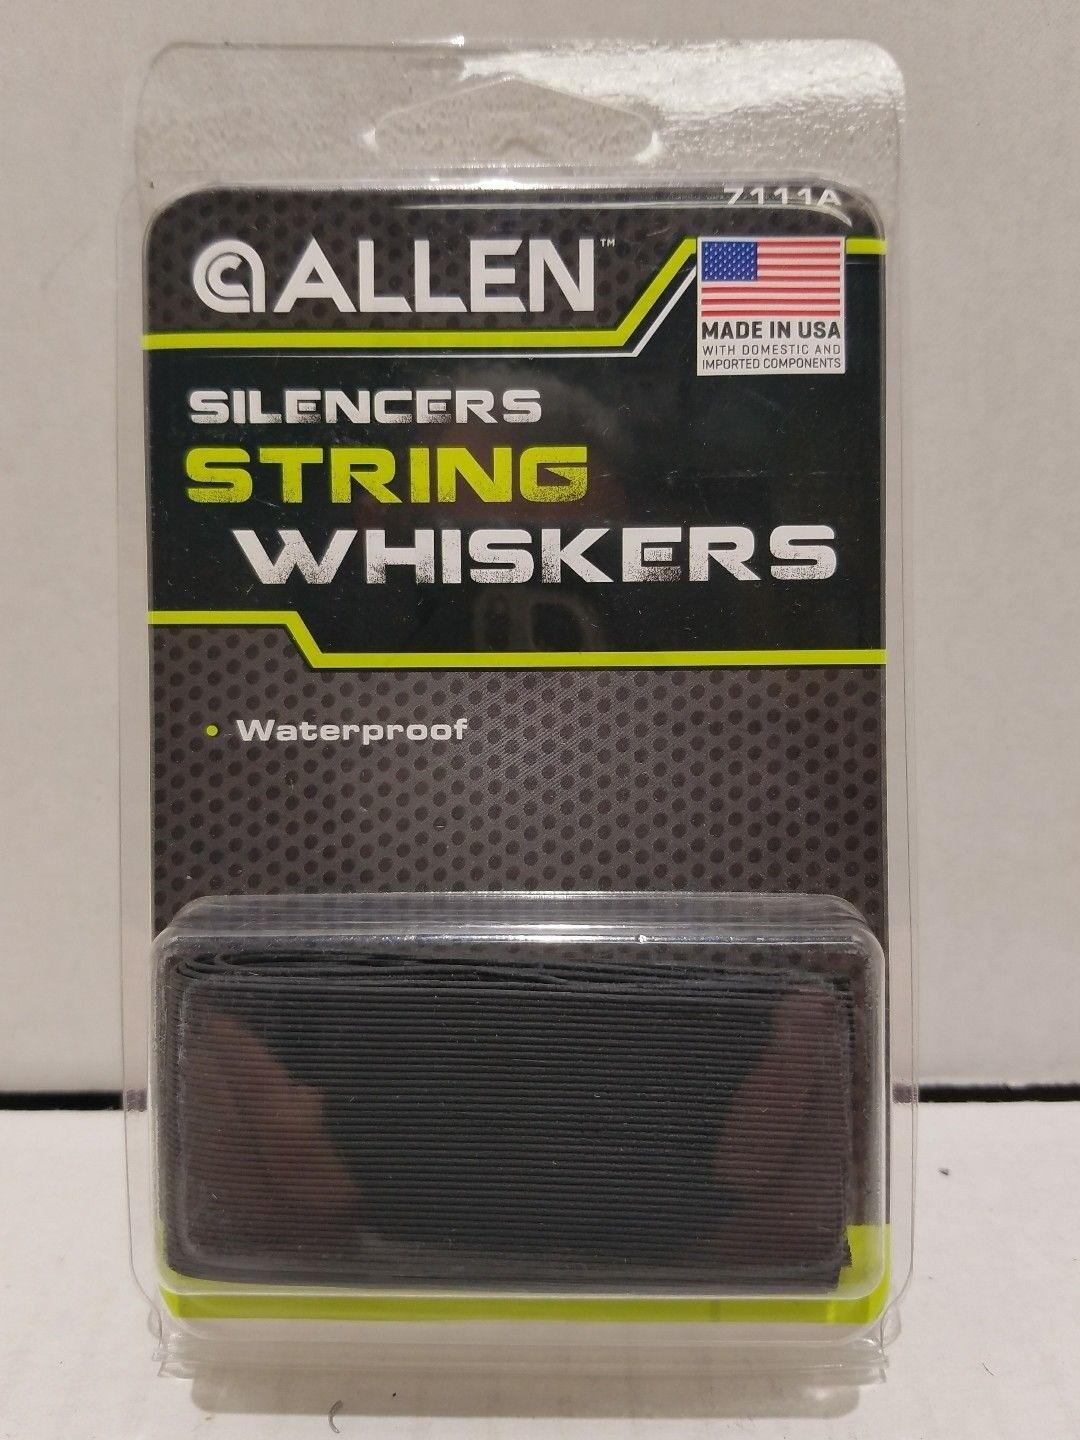 Allen Archery Silencers String Whiskers #7111A Bowhunting-LOT OF 7 Allen 7111A